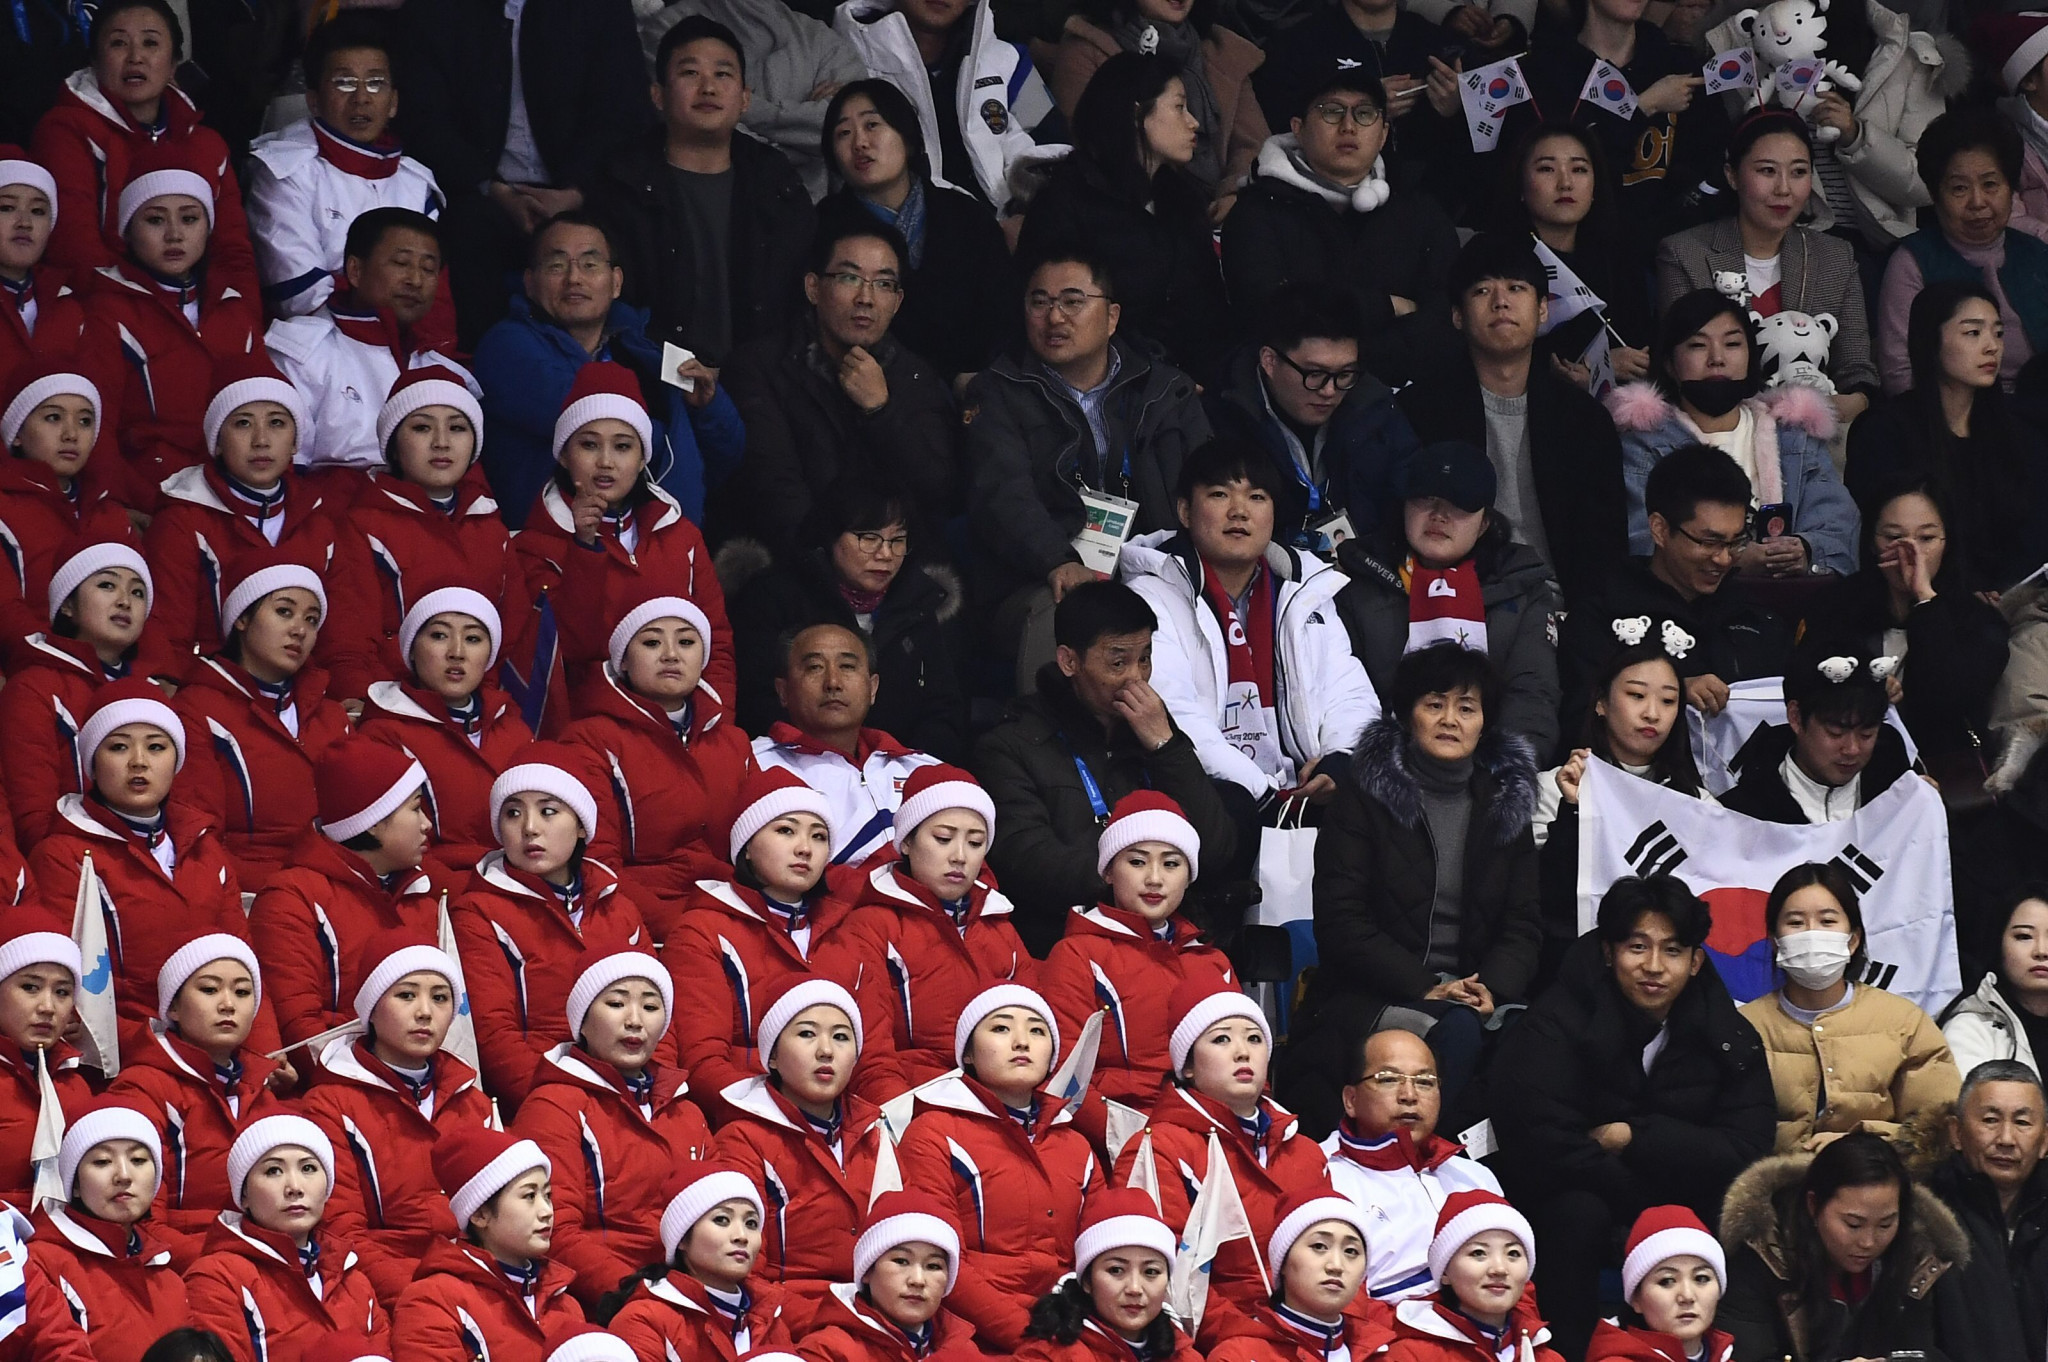 North Korea's presence, including their cheerleading squad, was a highlight of Pyeongchang 2018 ©Getty Images